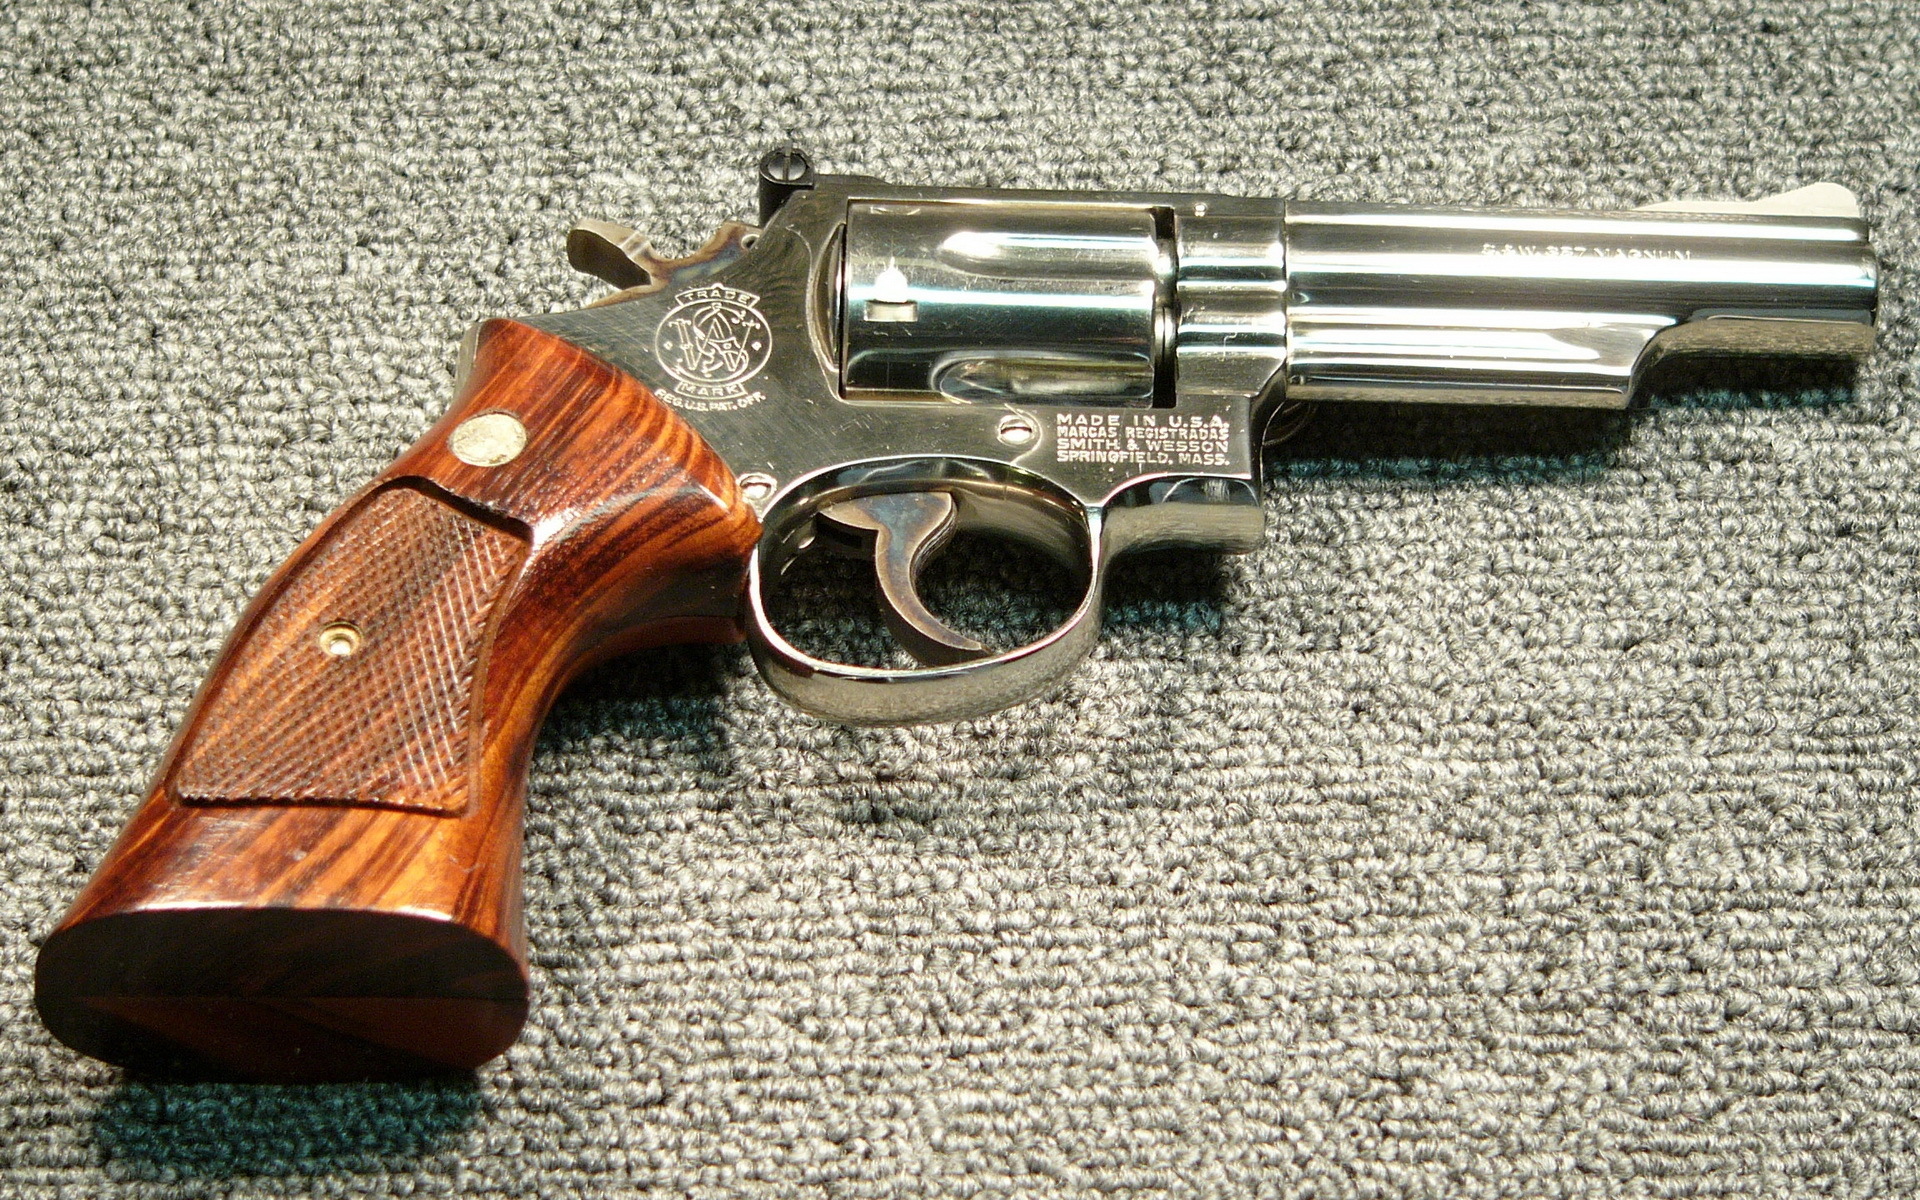 weapons, smith & wesson 357 magnum revolver